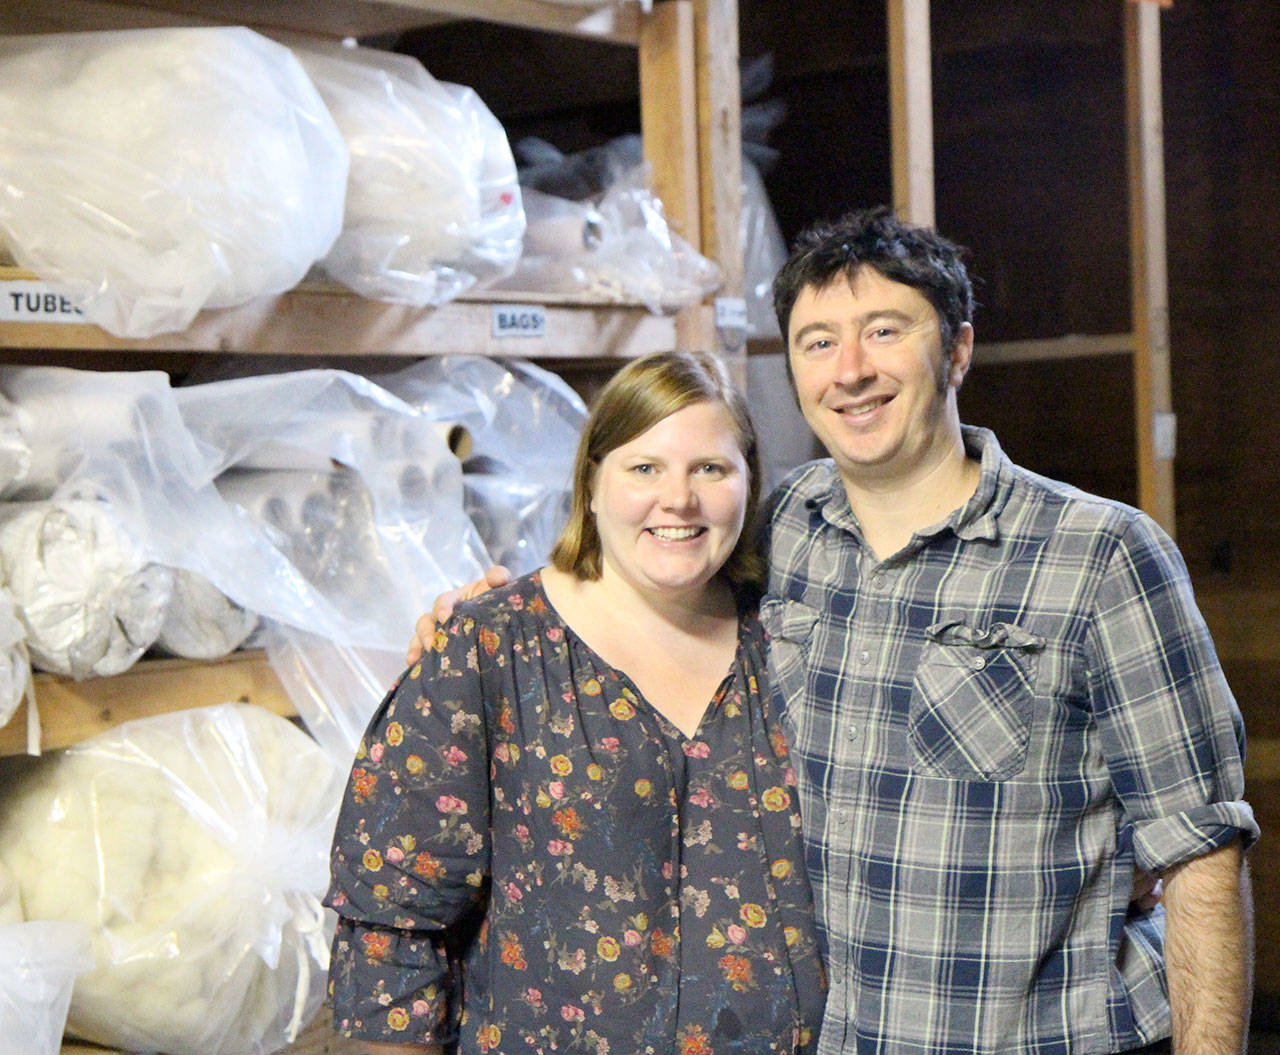 Mindy and Jason Schaefer are the new owners of Oakville’s Holy Lamb Organics as of November. They already have expanded the nearly 20-year-old business to include a showroom in Olympia and to have received organic certification. Photo taken Aug. 24, 2018, in Oakville, by Michael Lang, The Vidette